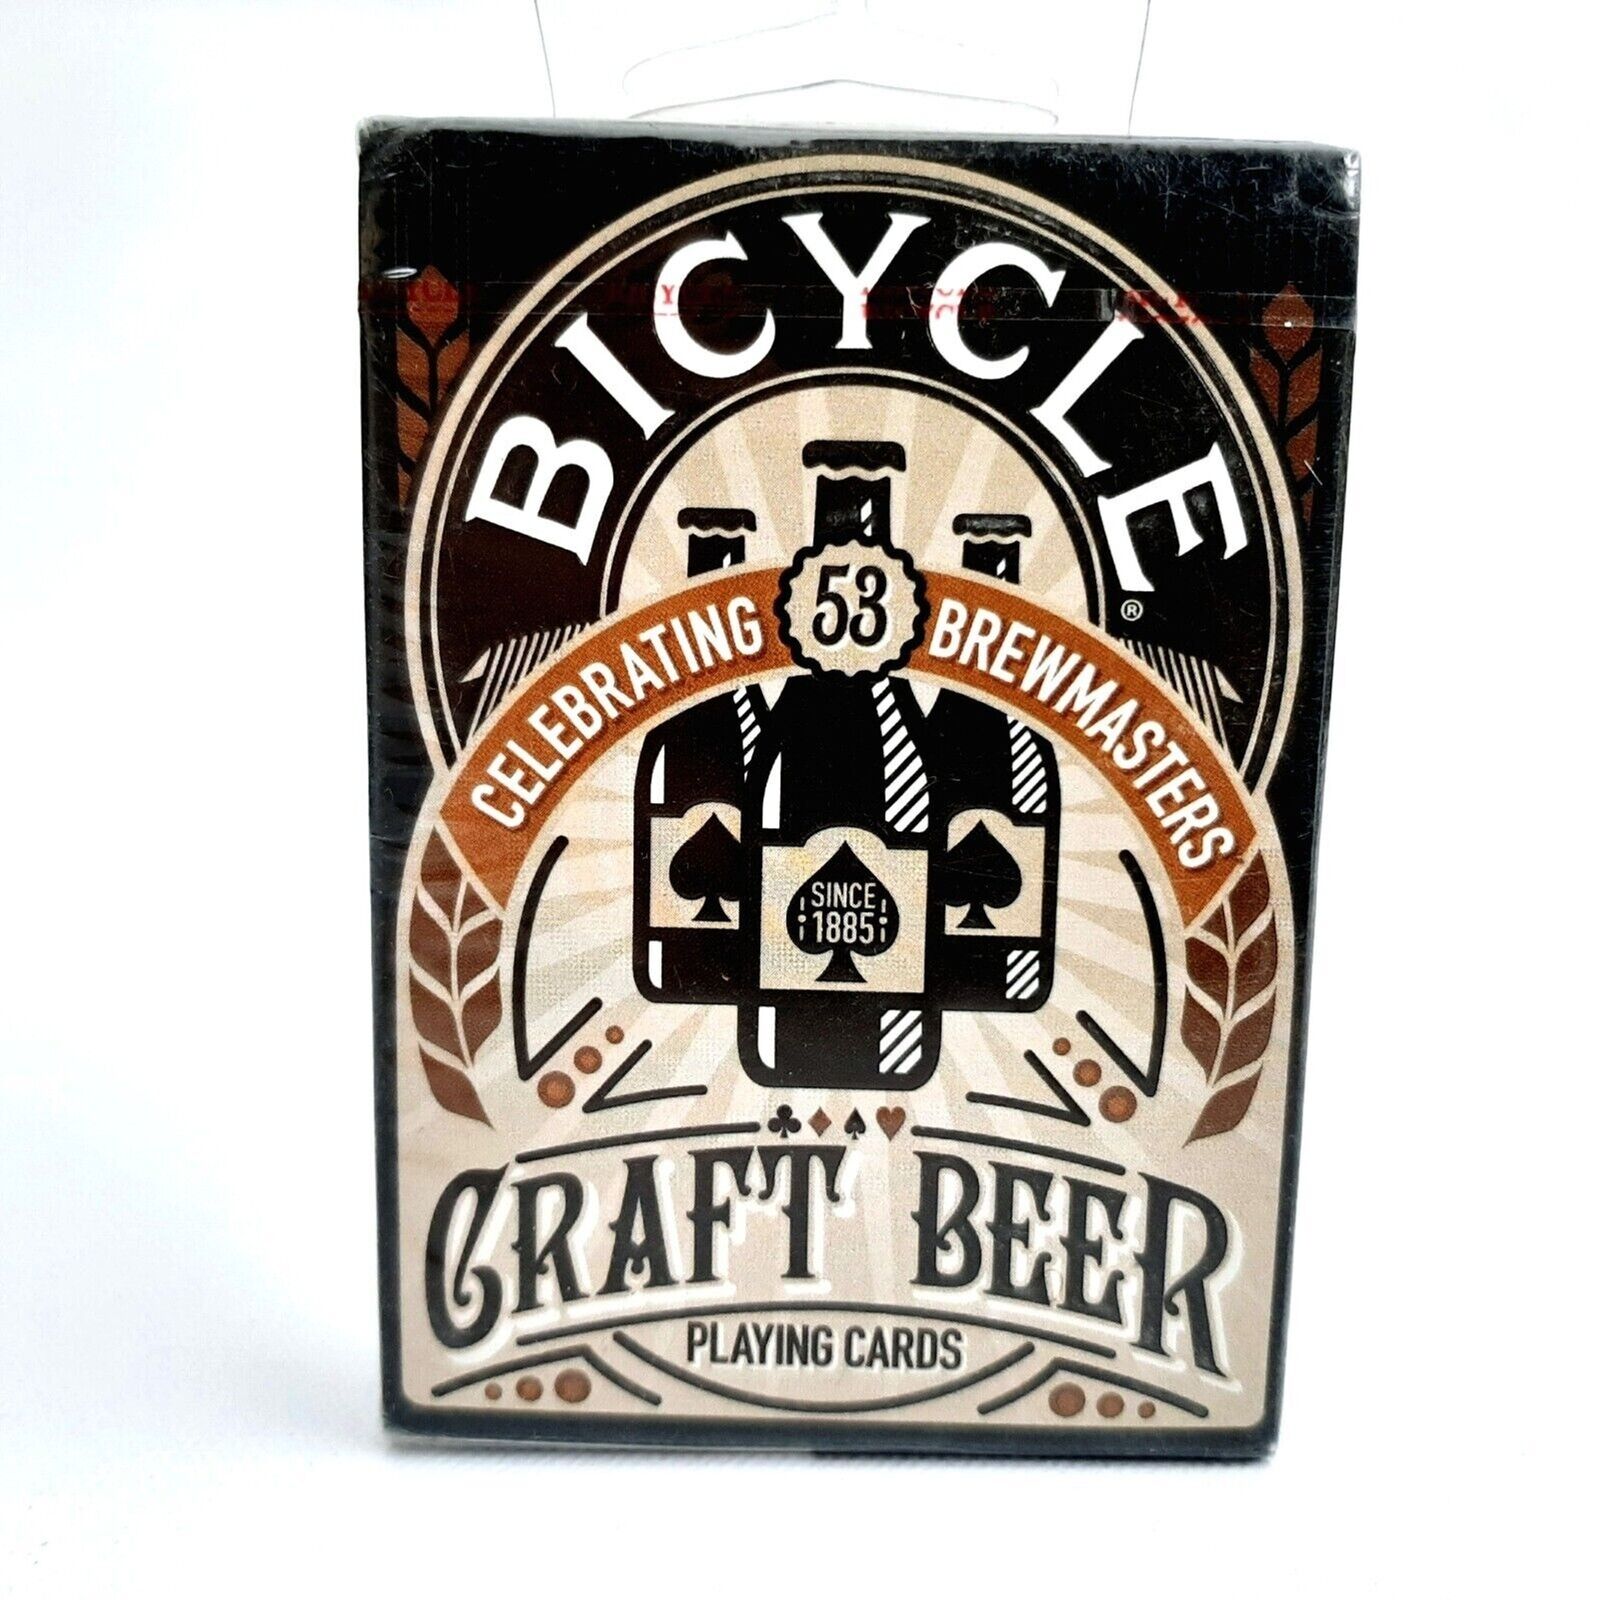 Bicycle Craft Beers Playing Cards Air Cushion Celebrating 53 Brewmasters Deck